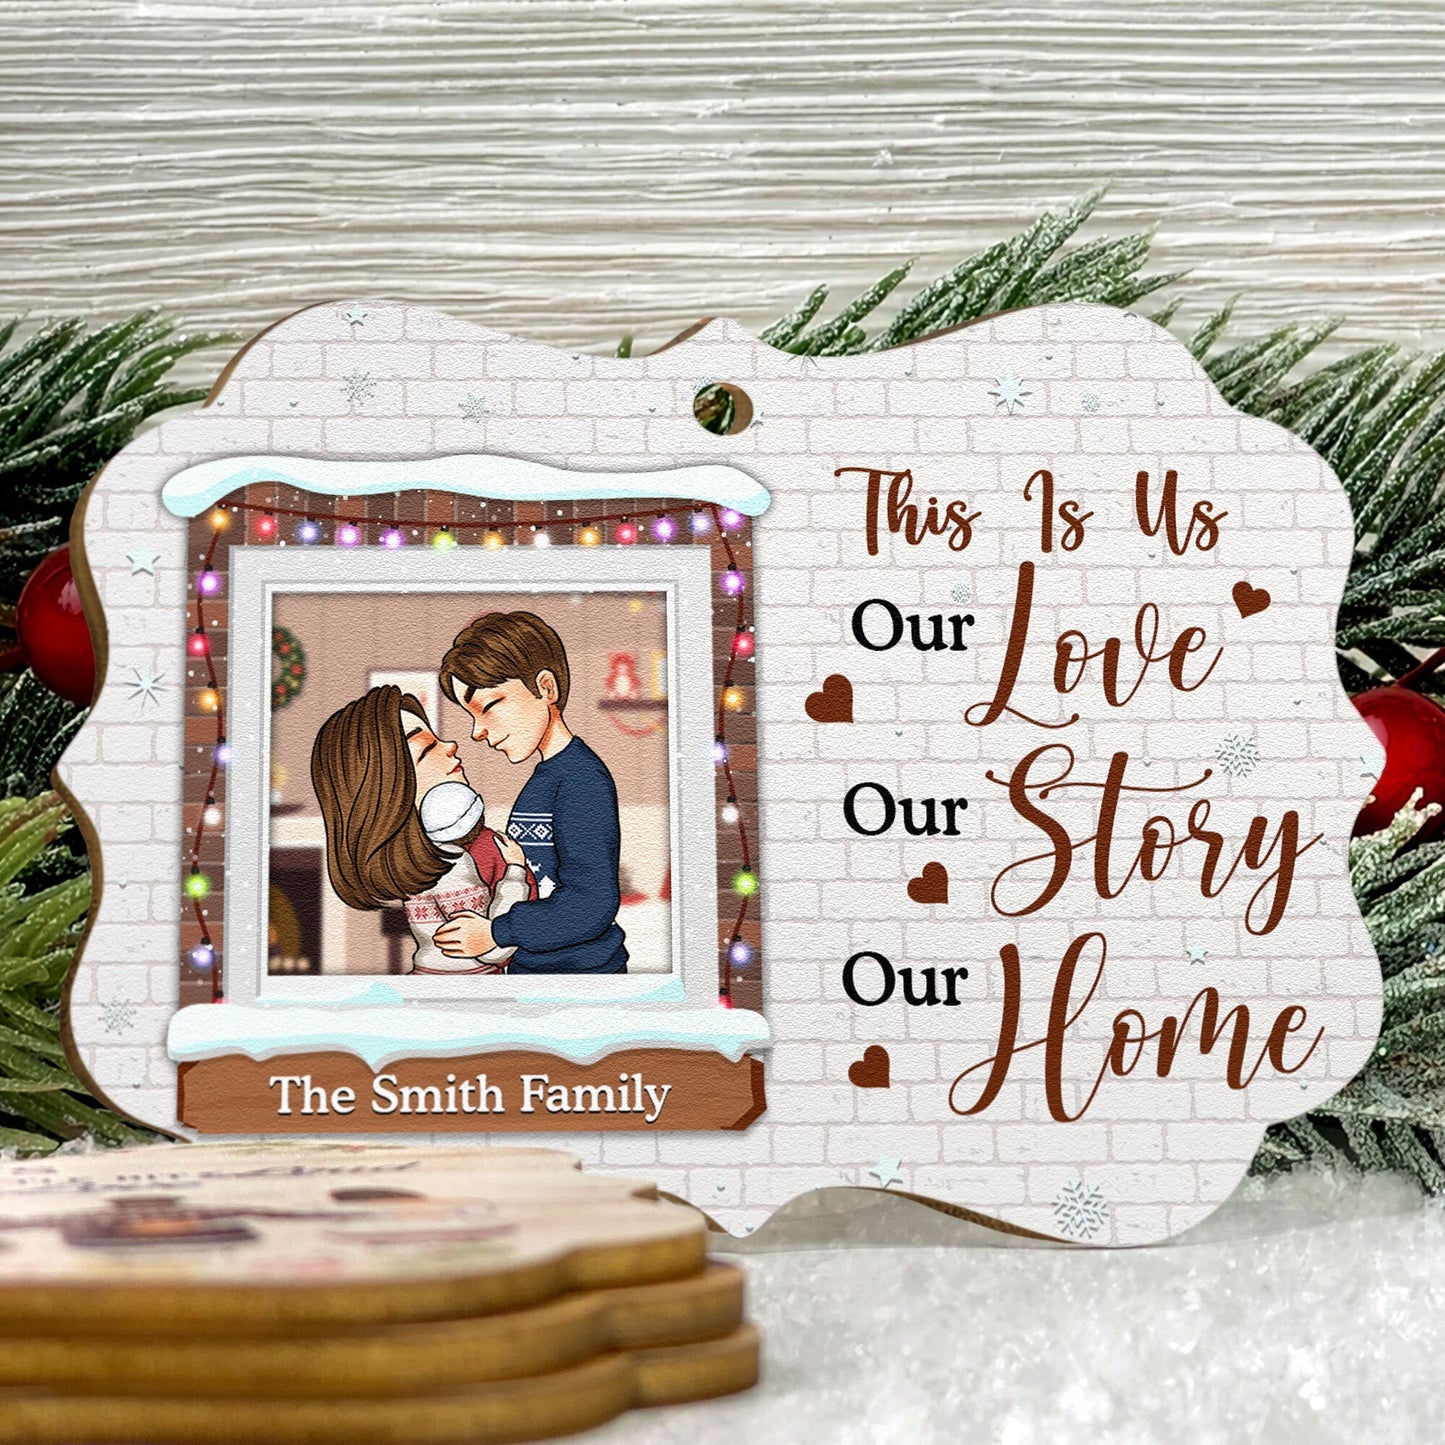 Our Love Our Story Our Home - Personalized Aluminum/Wooden Ornament - Christmas Gift For Family, Newly Wed, Newborn Baby, Husband, Wife, Heartwarming Gift